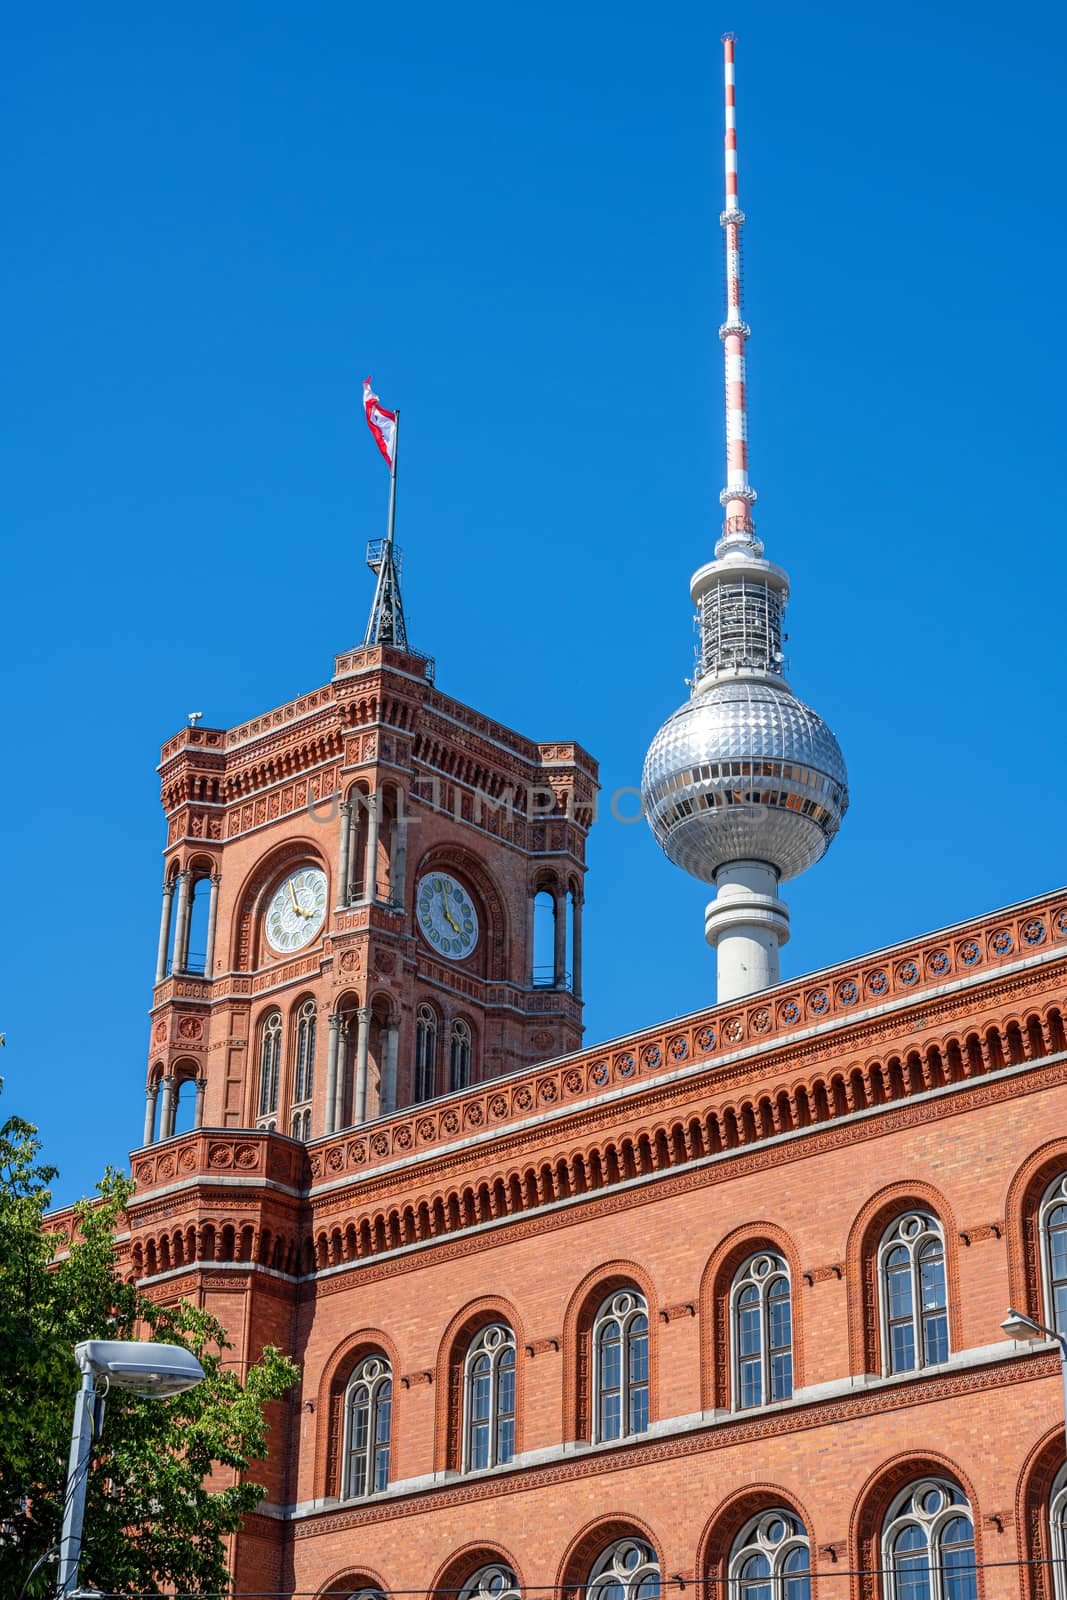 The famous Television Tower and the tower of the city hall in Berlin in front of a clear blue sky